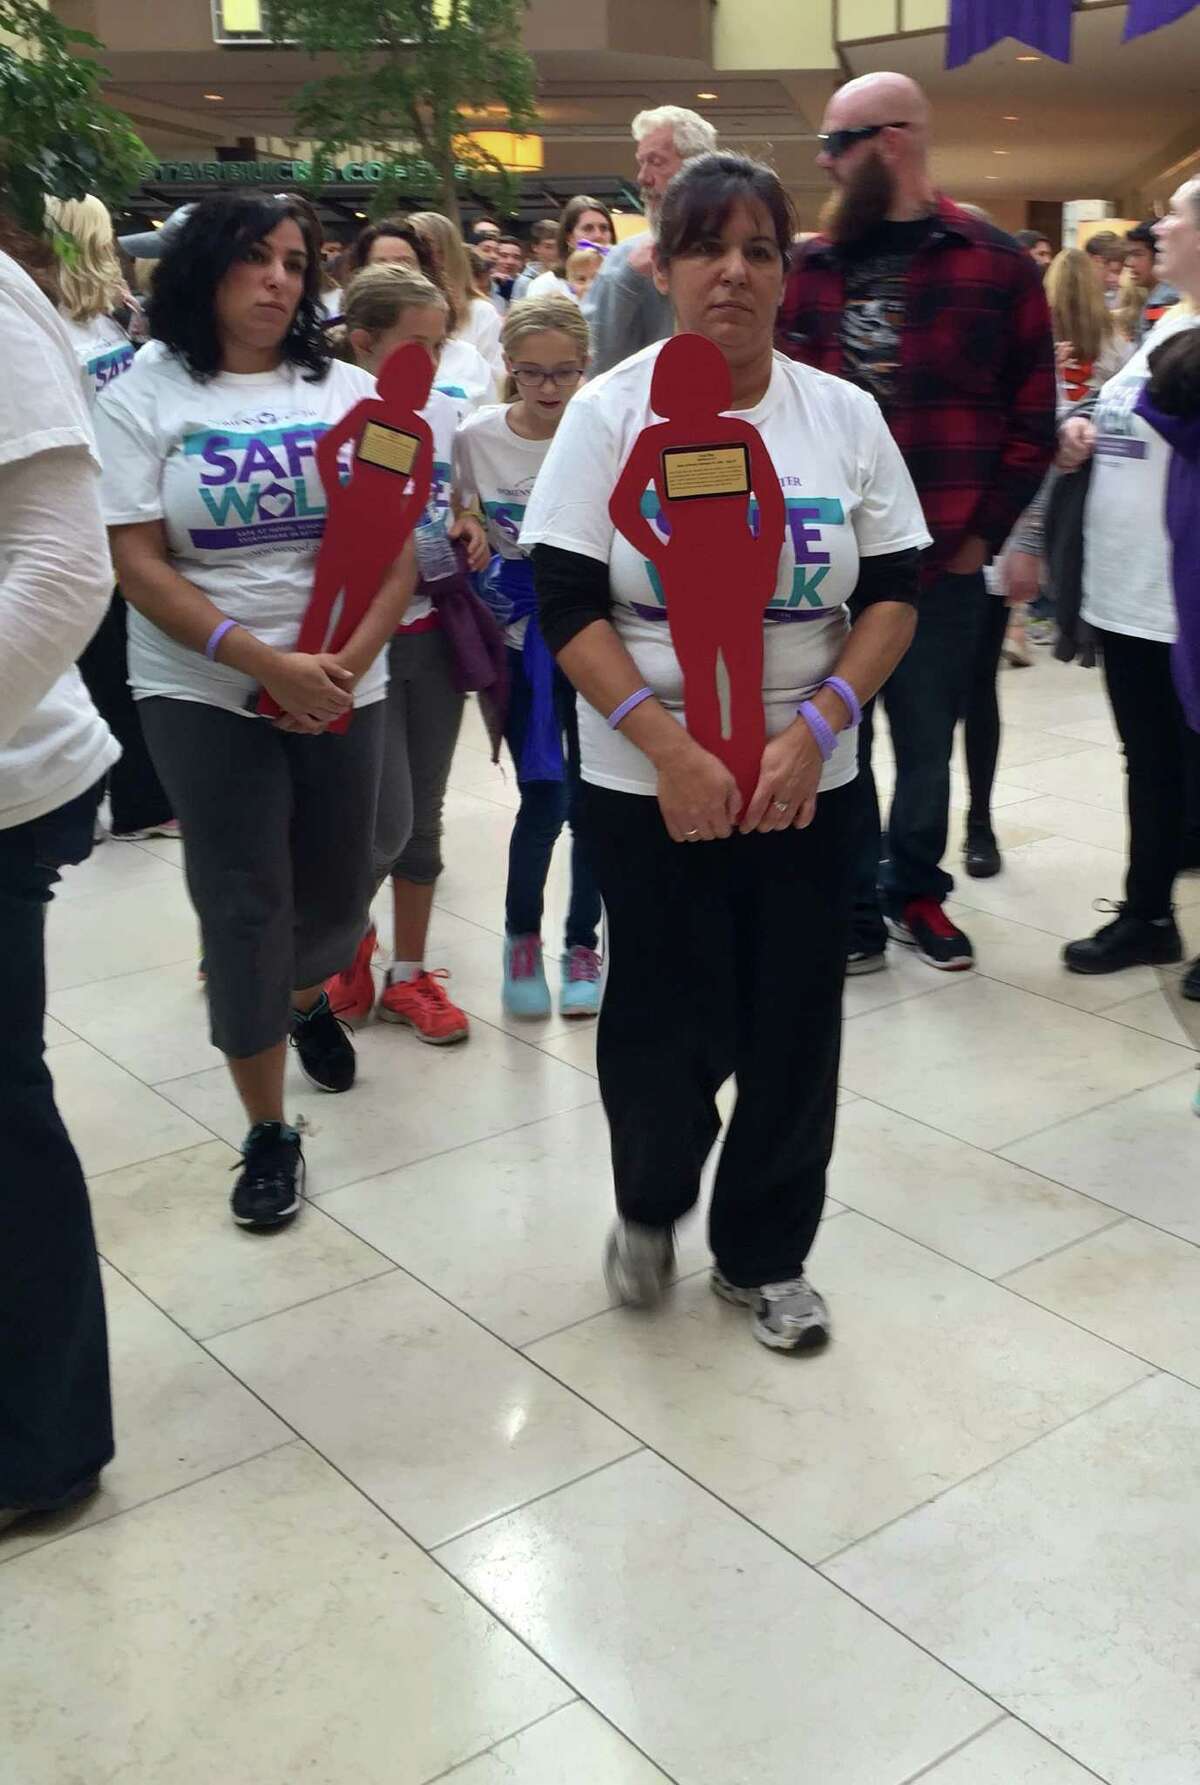 Participants in Sunday’s Safe Walk carry “silent witnesses,” which represent victims of interpersonal violence in the area since the passage of Connecticut’s domestic violence law in 1986. Nearly 1,000 people attended the Safe Walk at the Danbury Fair Mall.